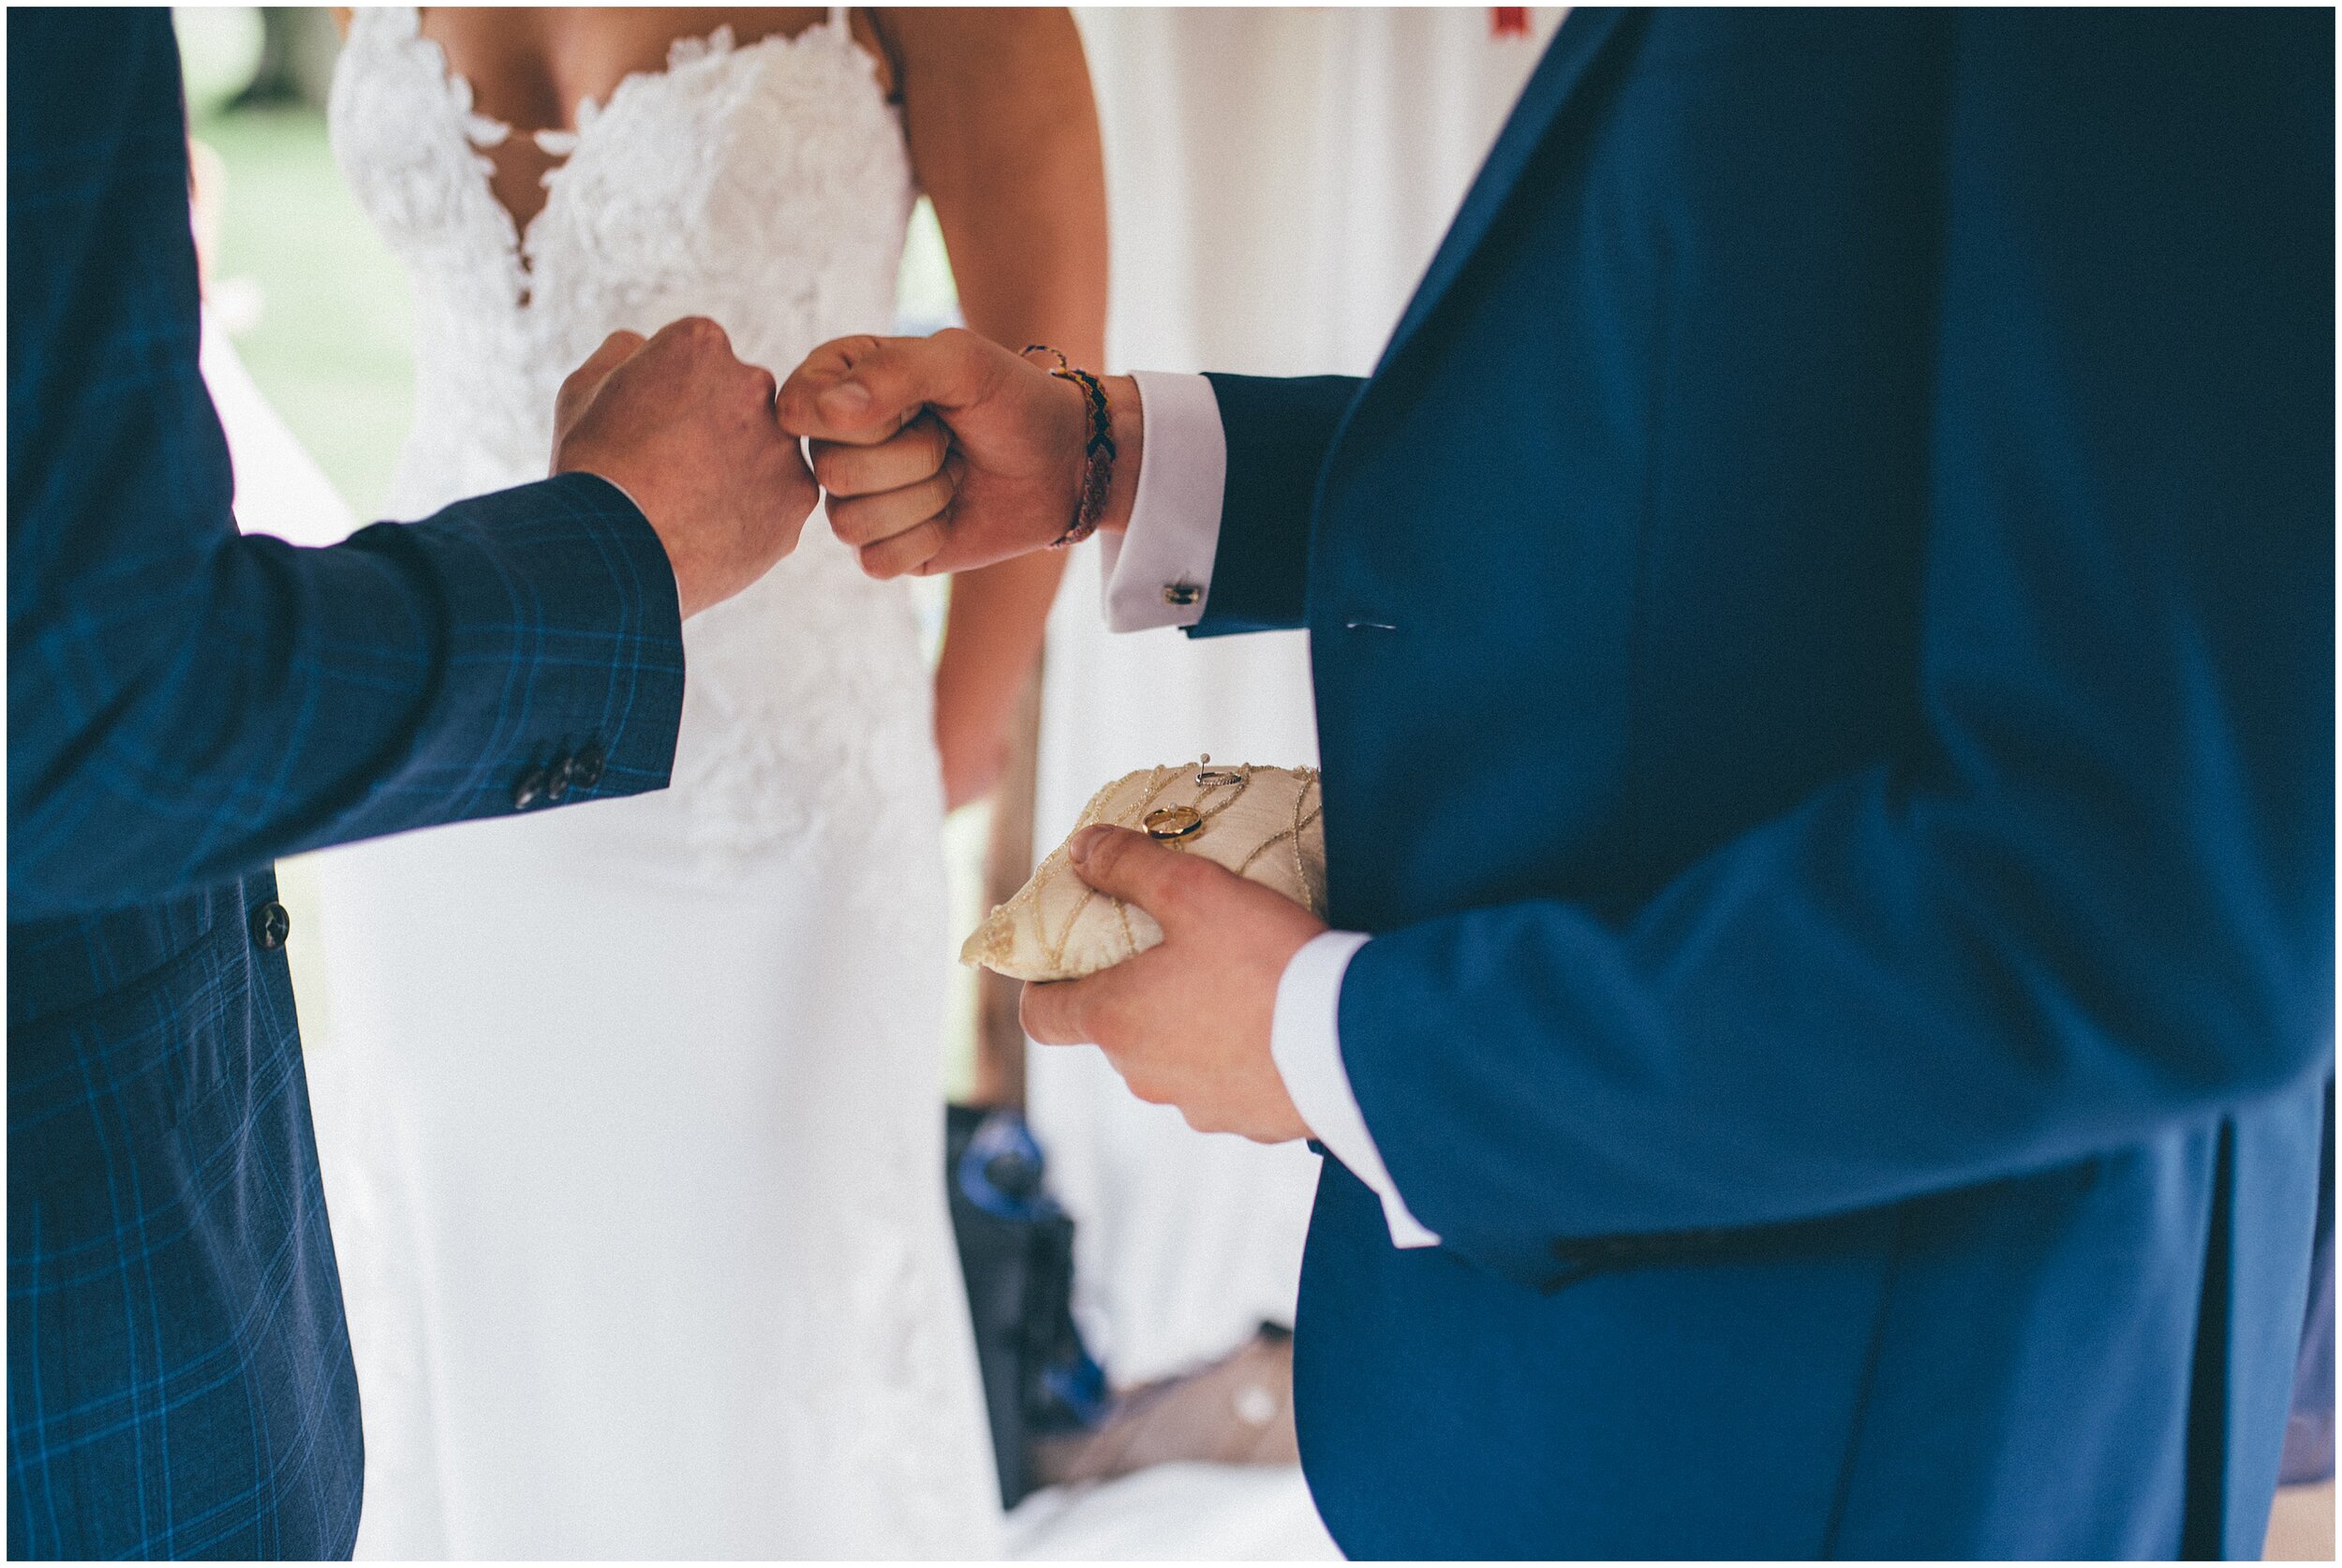 Groom fist bumps his best friend before exchanging rings with his bride.